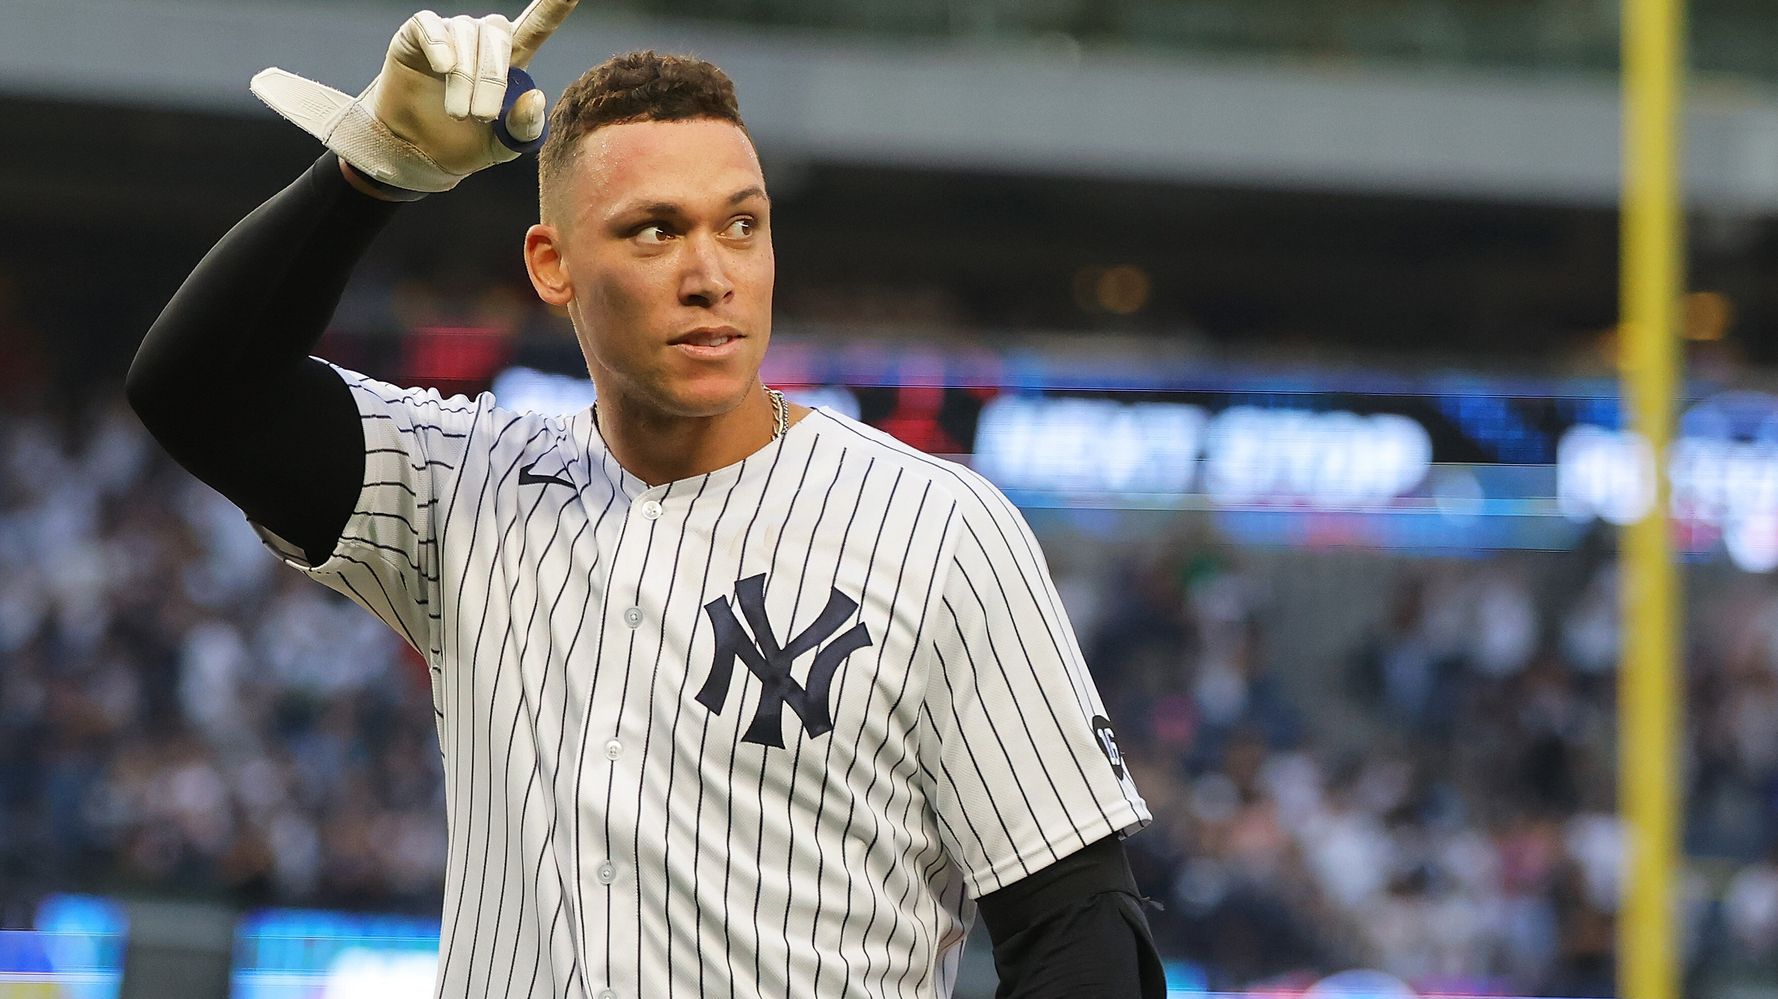 Yankees' Players' Weekend jerseys includes nickname that looks anti-Semitic  